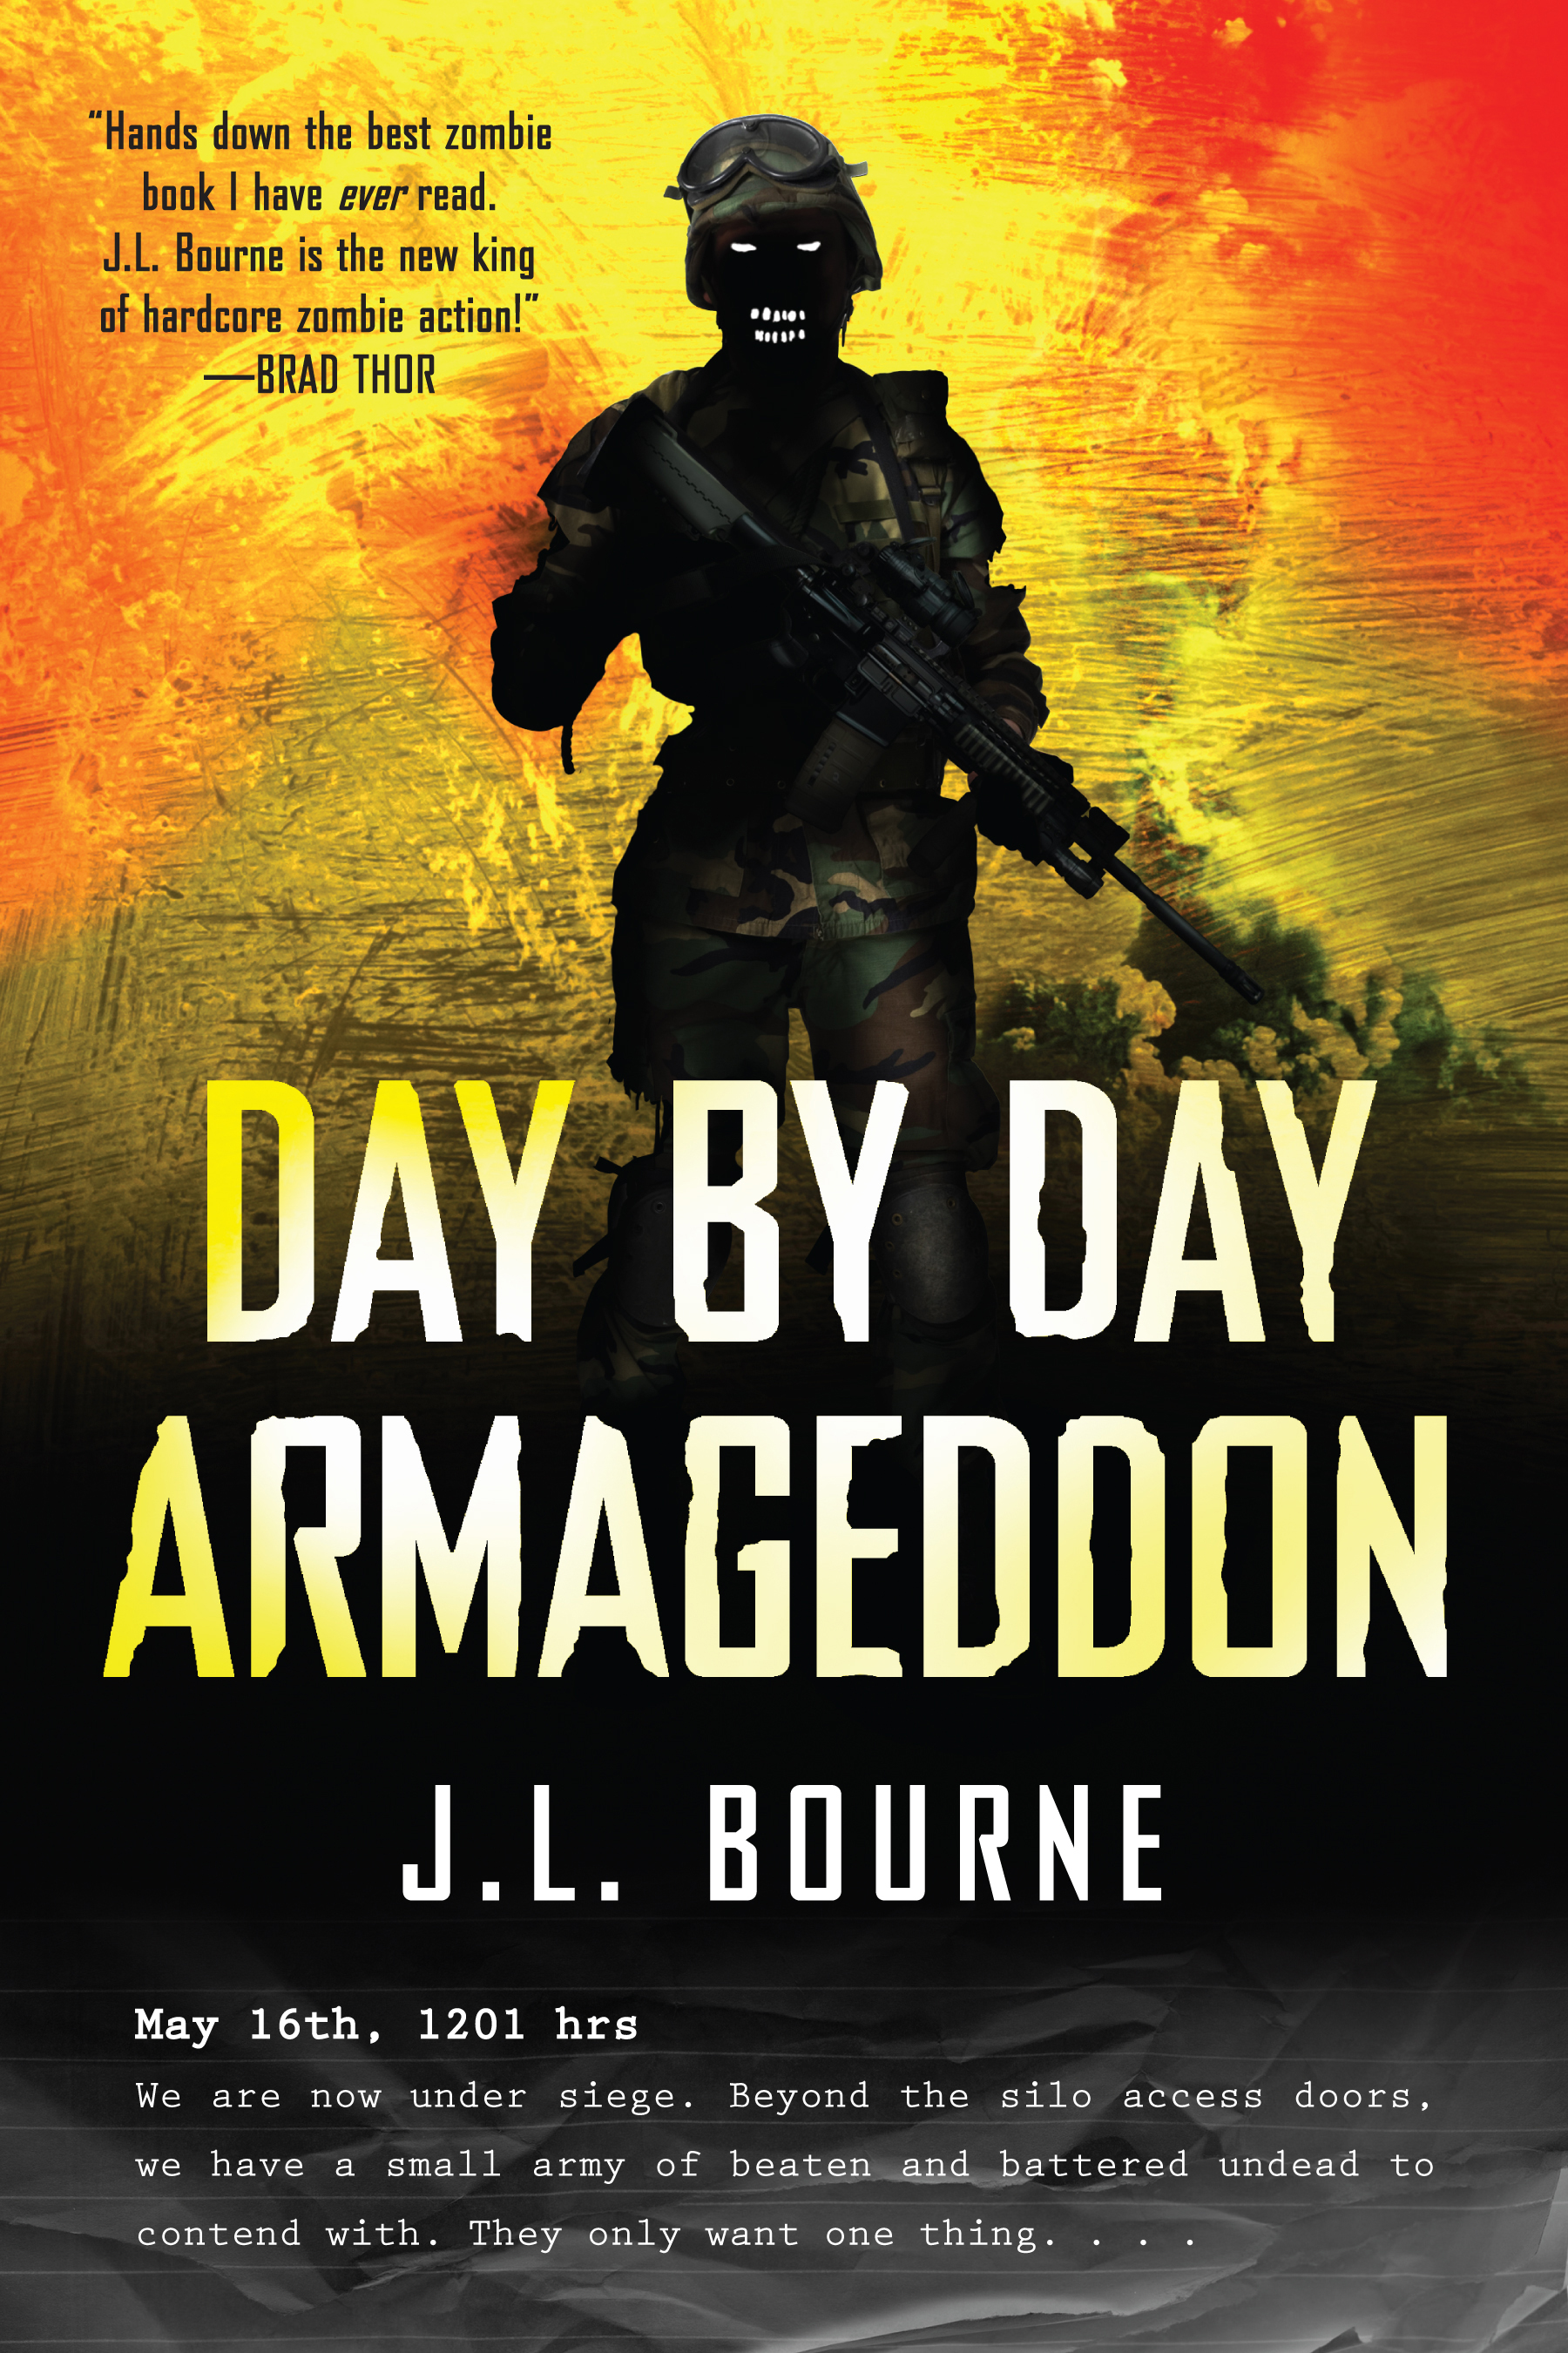 day by day armageddon by jl bourne